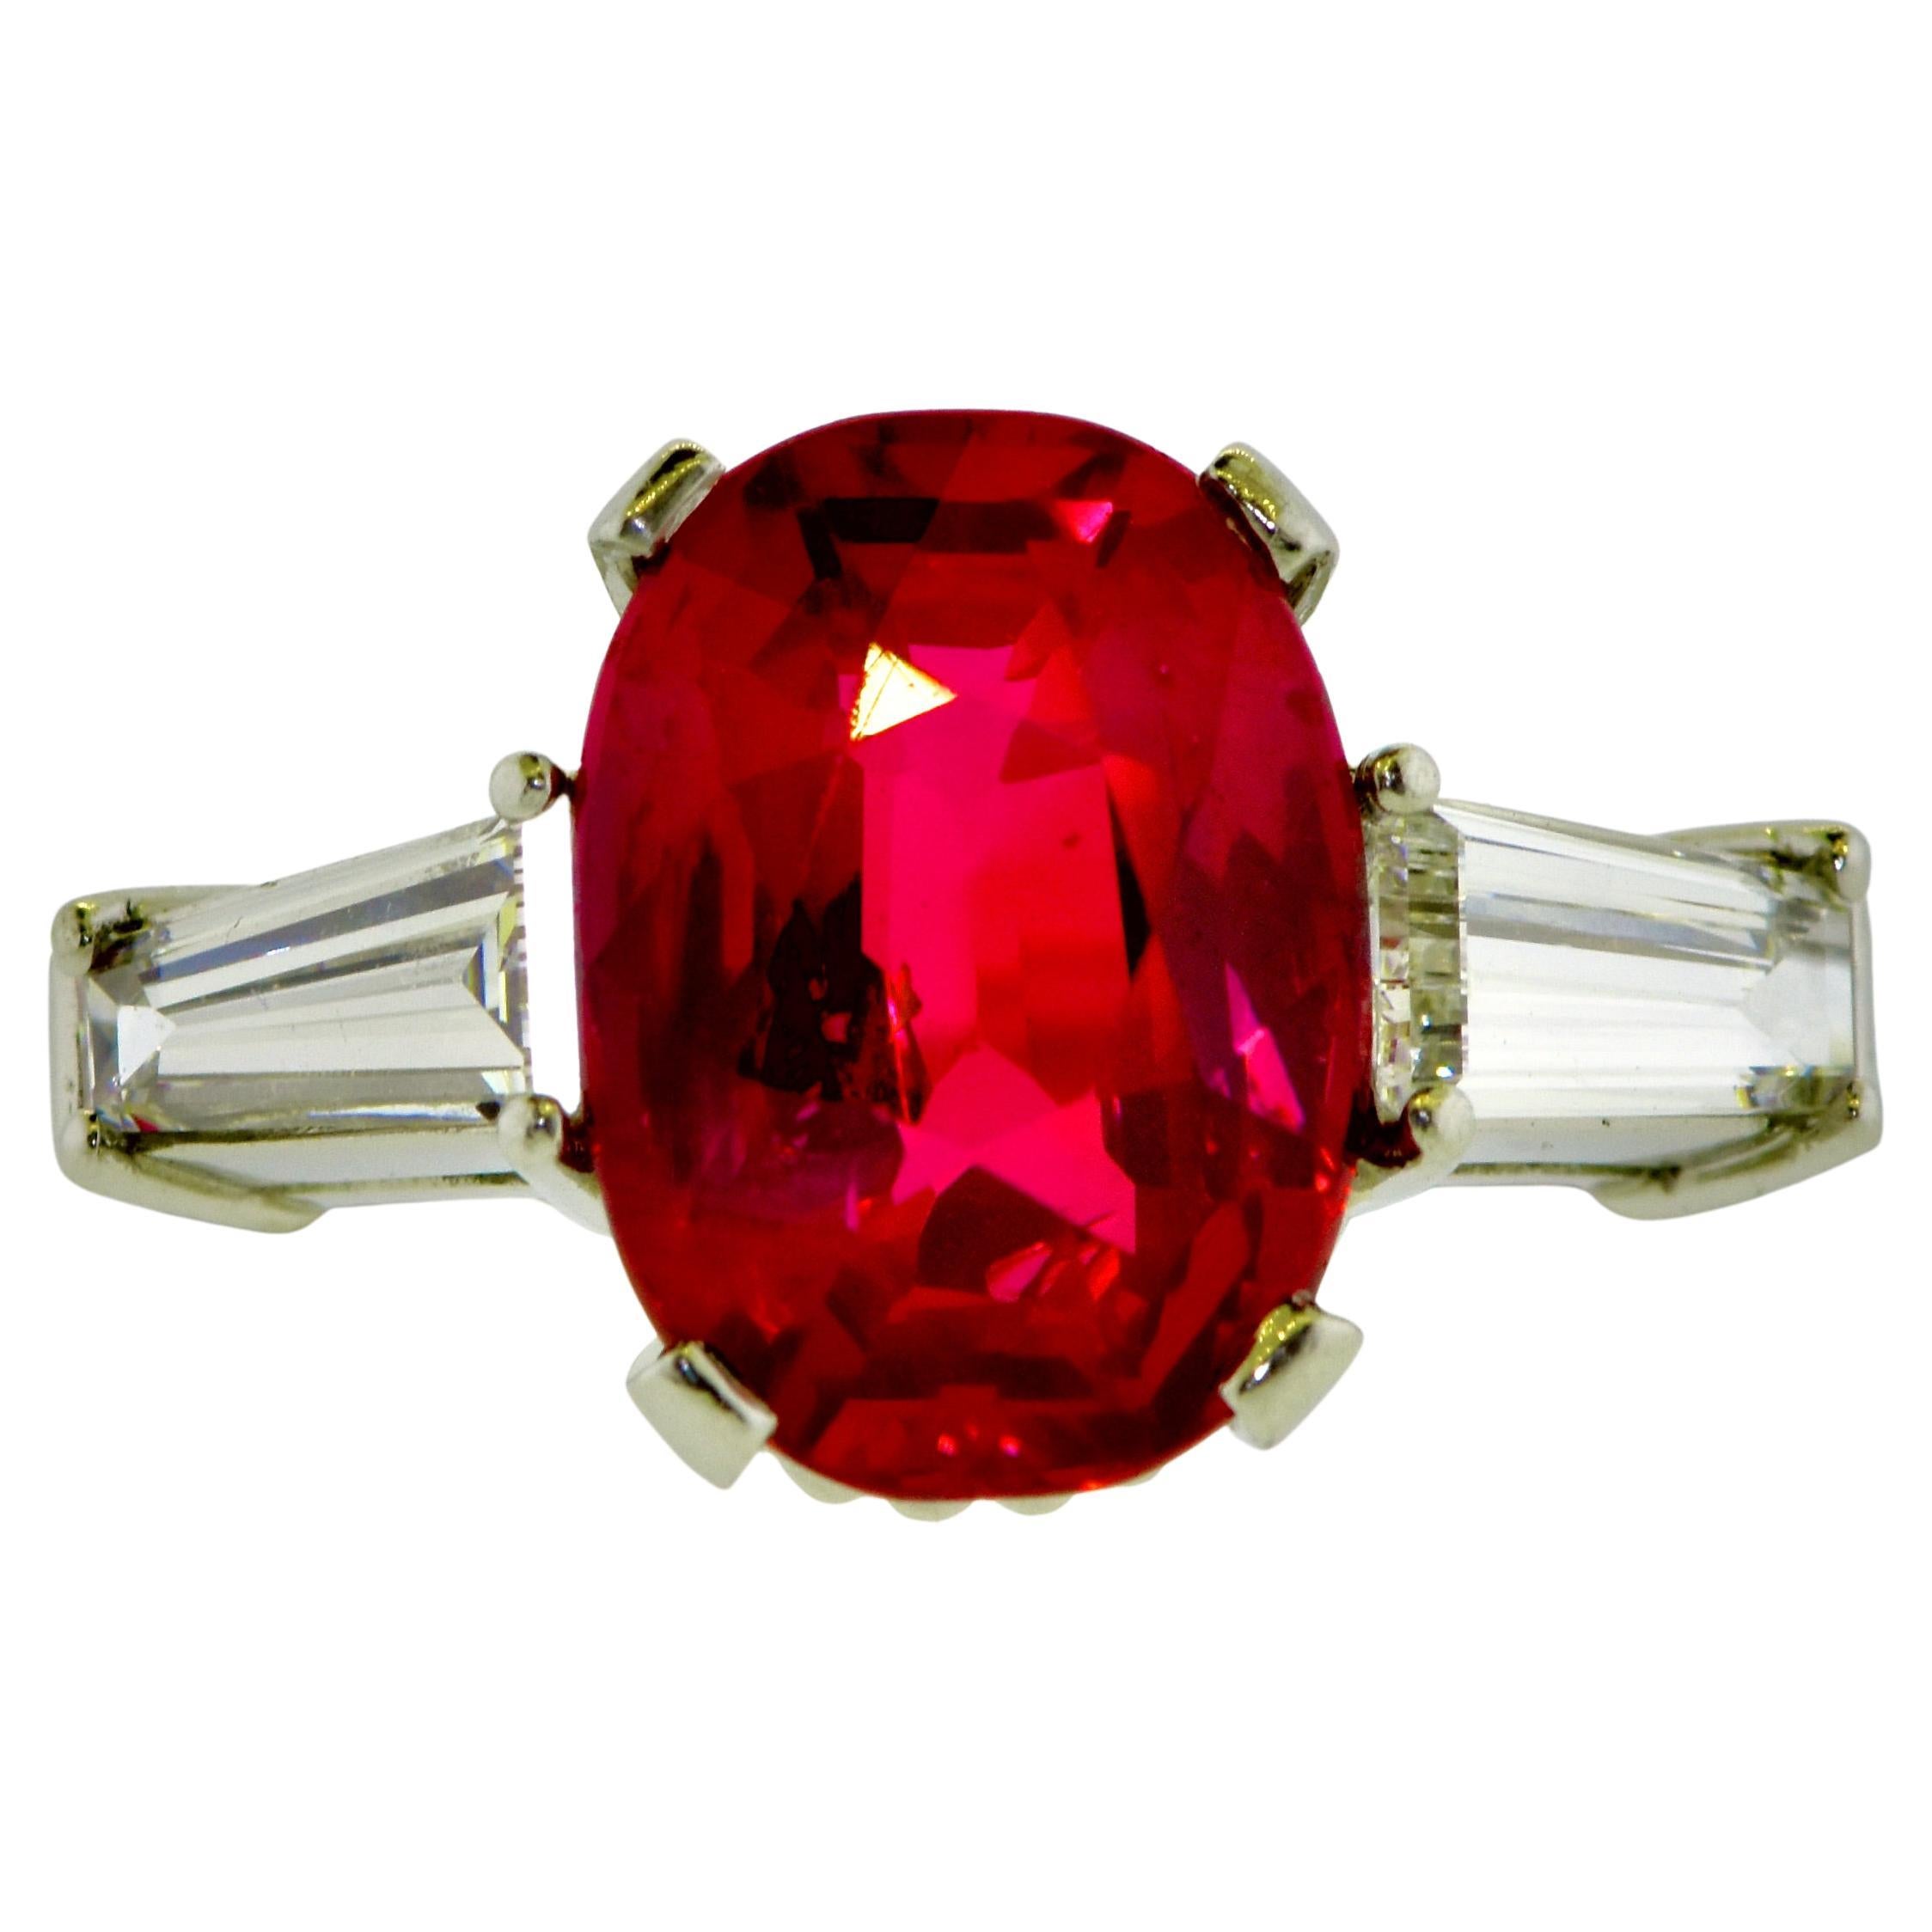 AGL Certified Unheated Gem Burma Ruby, 4.71 Cts., and Diamond Plat, Ring c. 1950